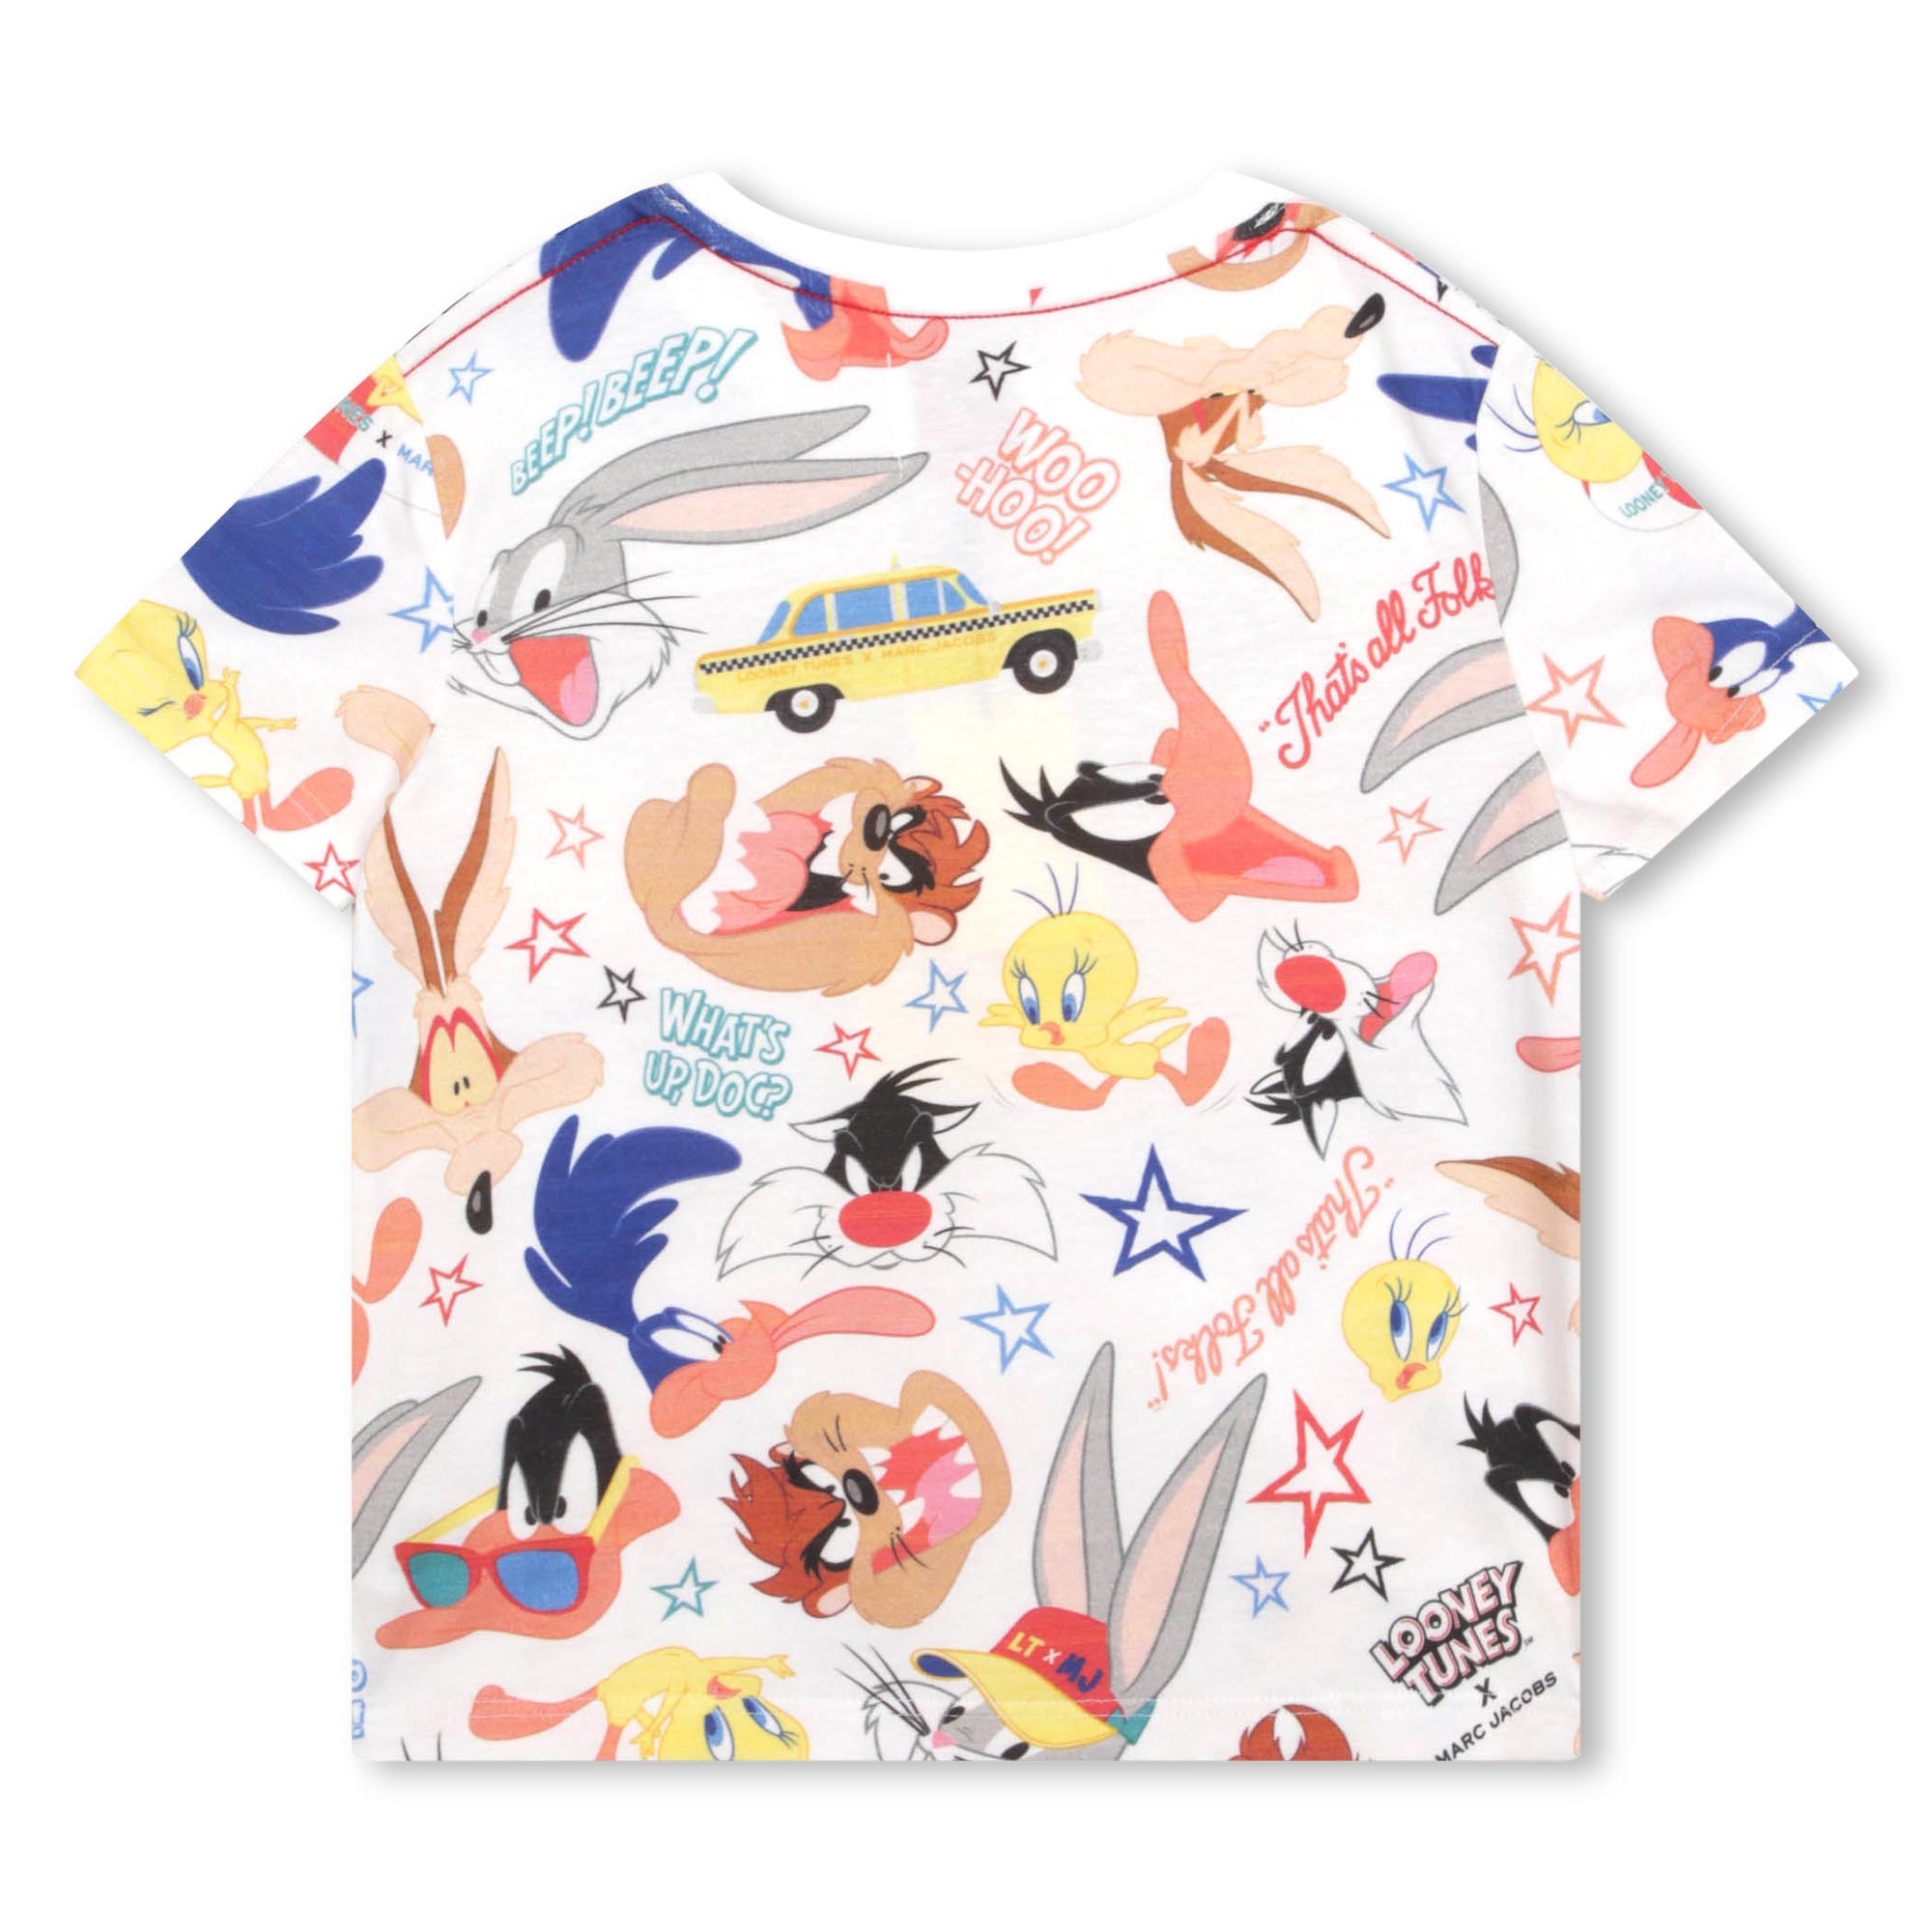 T-shirt with all-over print MARC JACOBS for UNISEX